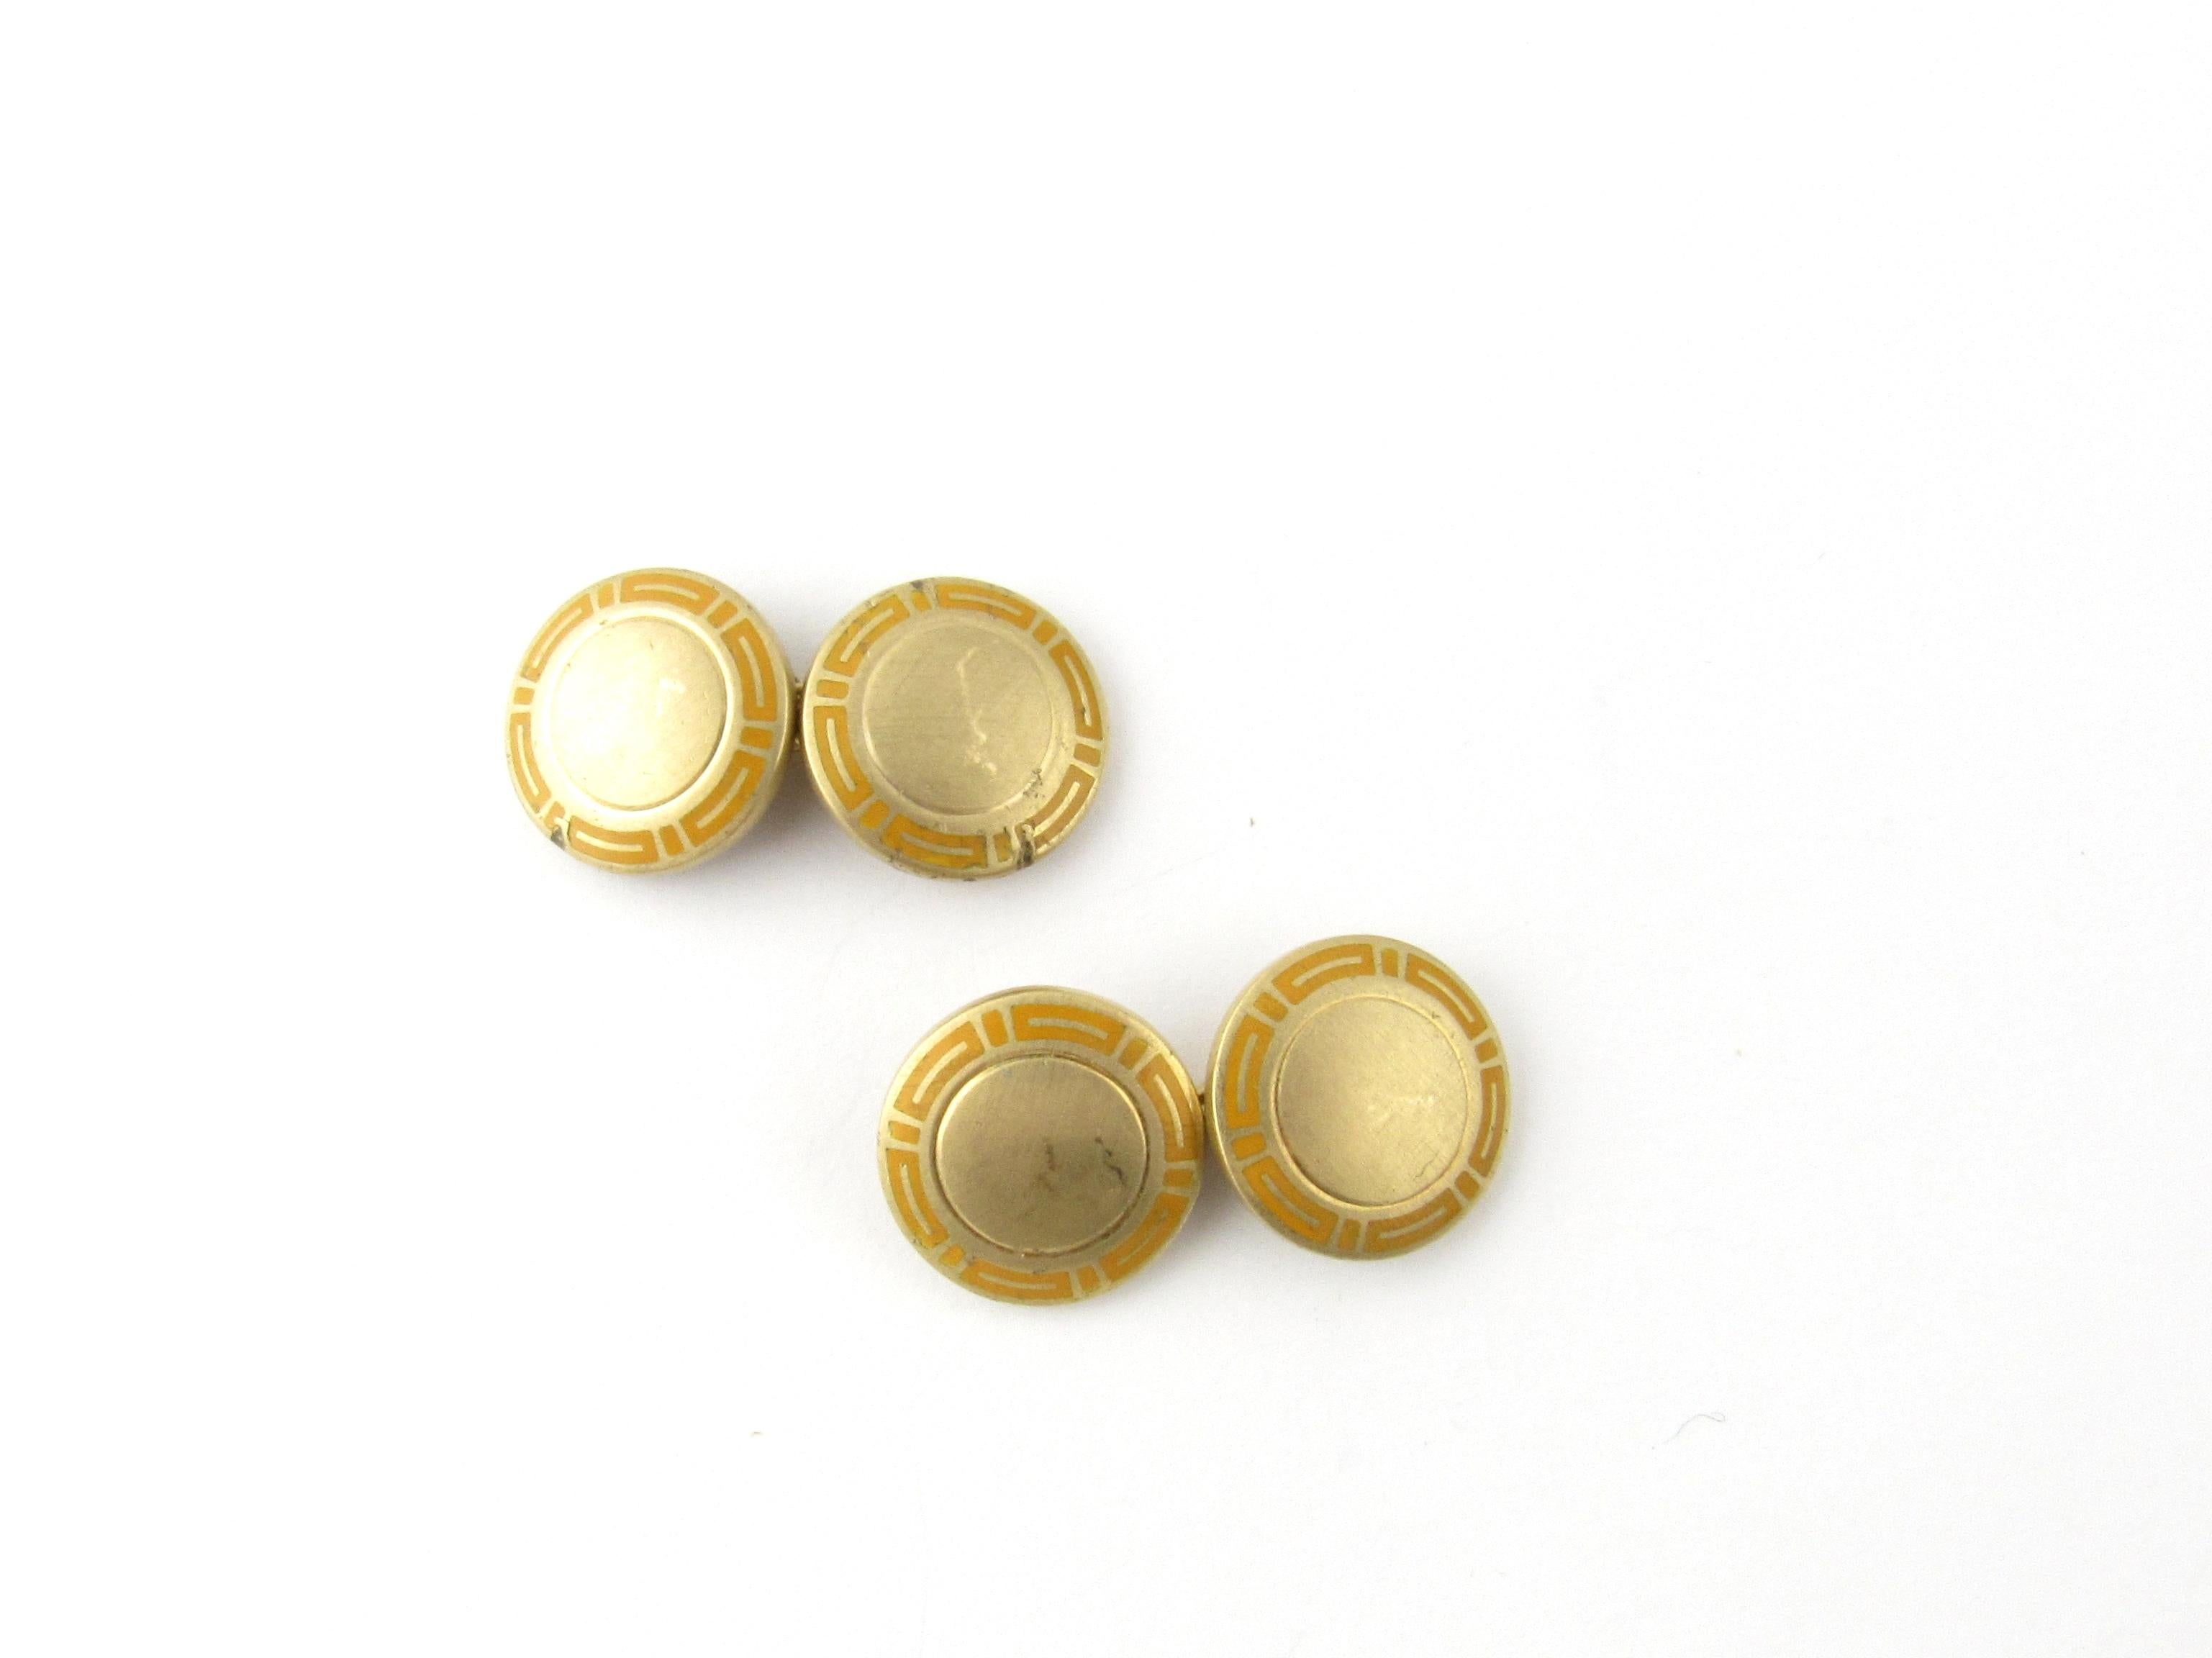 Vintage Bulgari 18 Karat Yellow Gold and Enamel Cufflinks

This elegant pair of double side button style cufflinks are beautifully crafted in 18K yellow gold and enamel.

Size: 14 mm

Weight: 12.7 dwt. / 19.9 gr.

Stamped: 750

Hallmark: